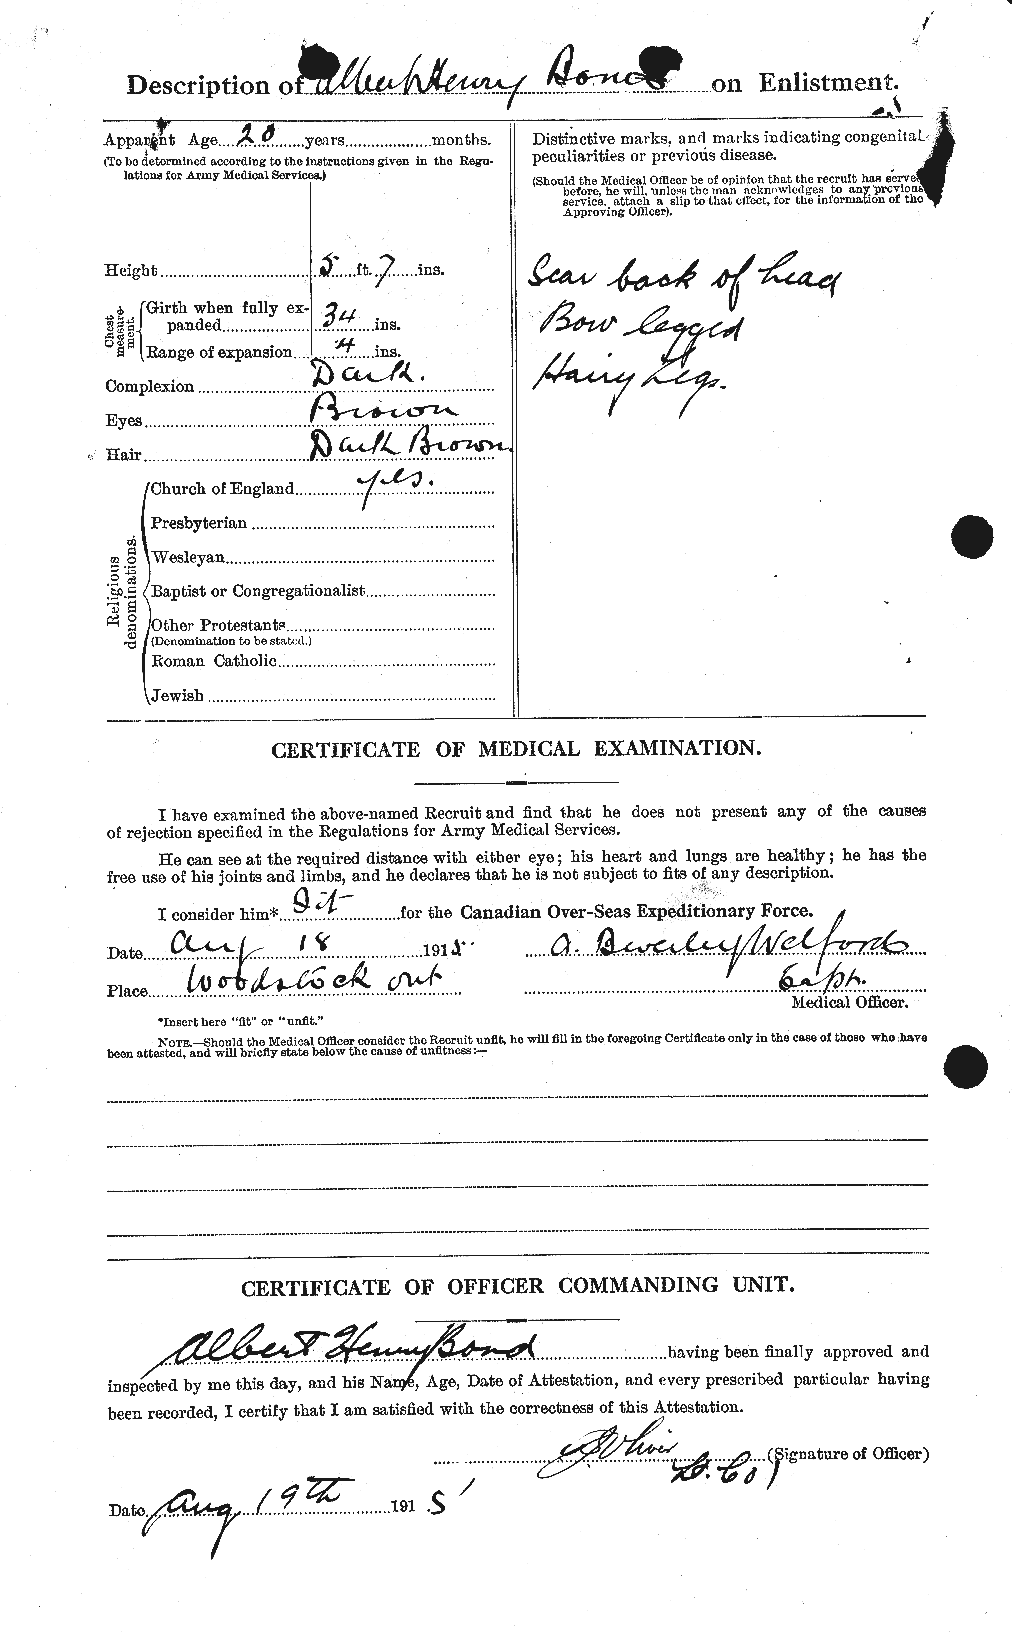 Personnel Records of the First World War - CEF 250241b